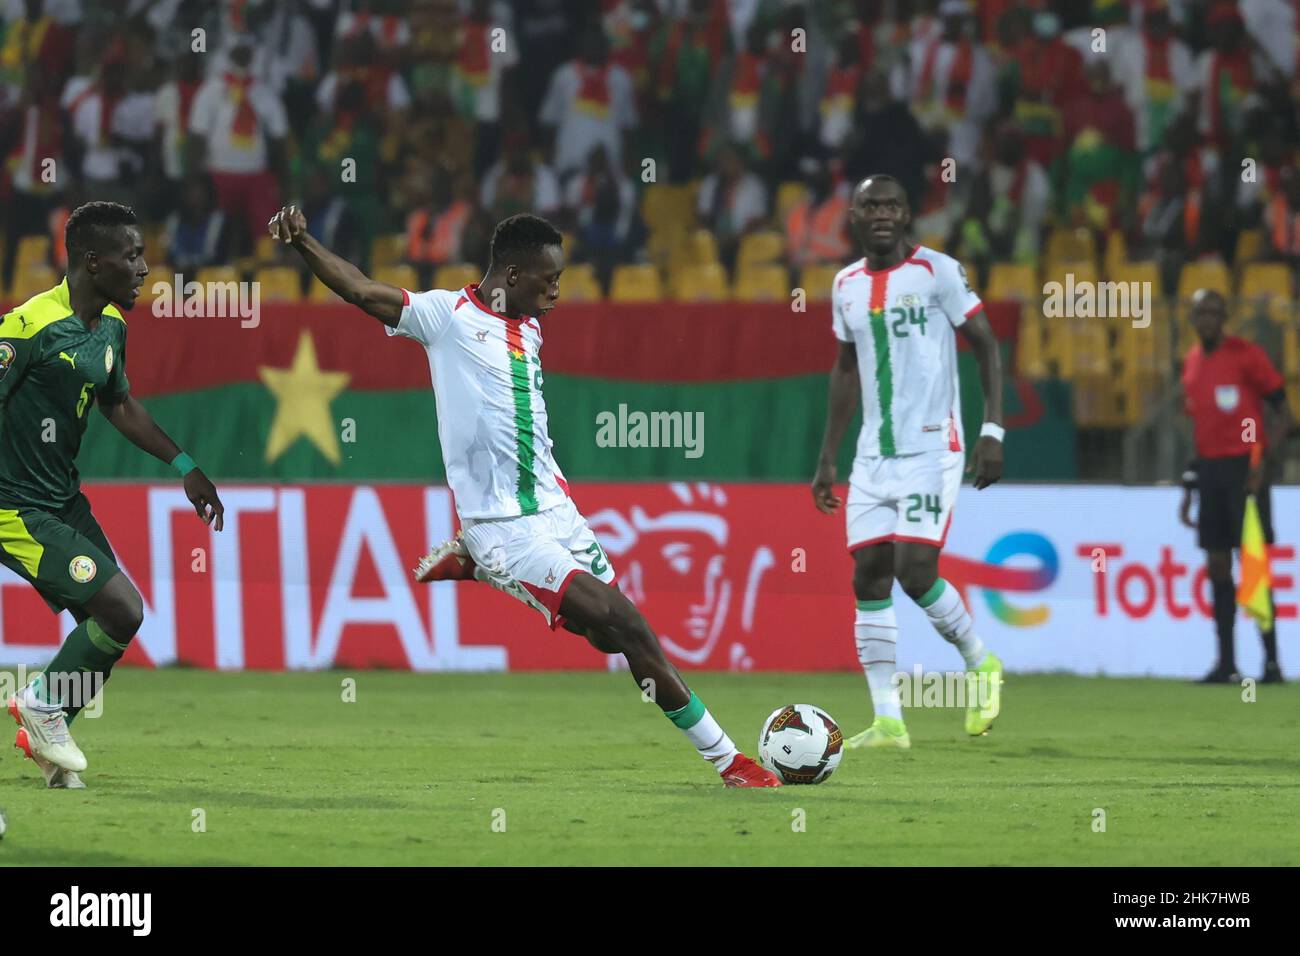 CAMEROON, Yaounde, 02 February 2022 - Adama Guira, Gustavo Sangare of Burkina Faso and Idrissa Gueye of Senegal during the Africa Cup of Nations play offs semi final match between Burkina Faso and Senegal at Stade Ahmadou Ahidjo,Yaounde, Cameroon, 02/02/2022/ Photo by SF Stock Photo